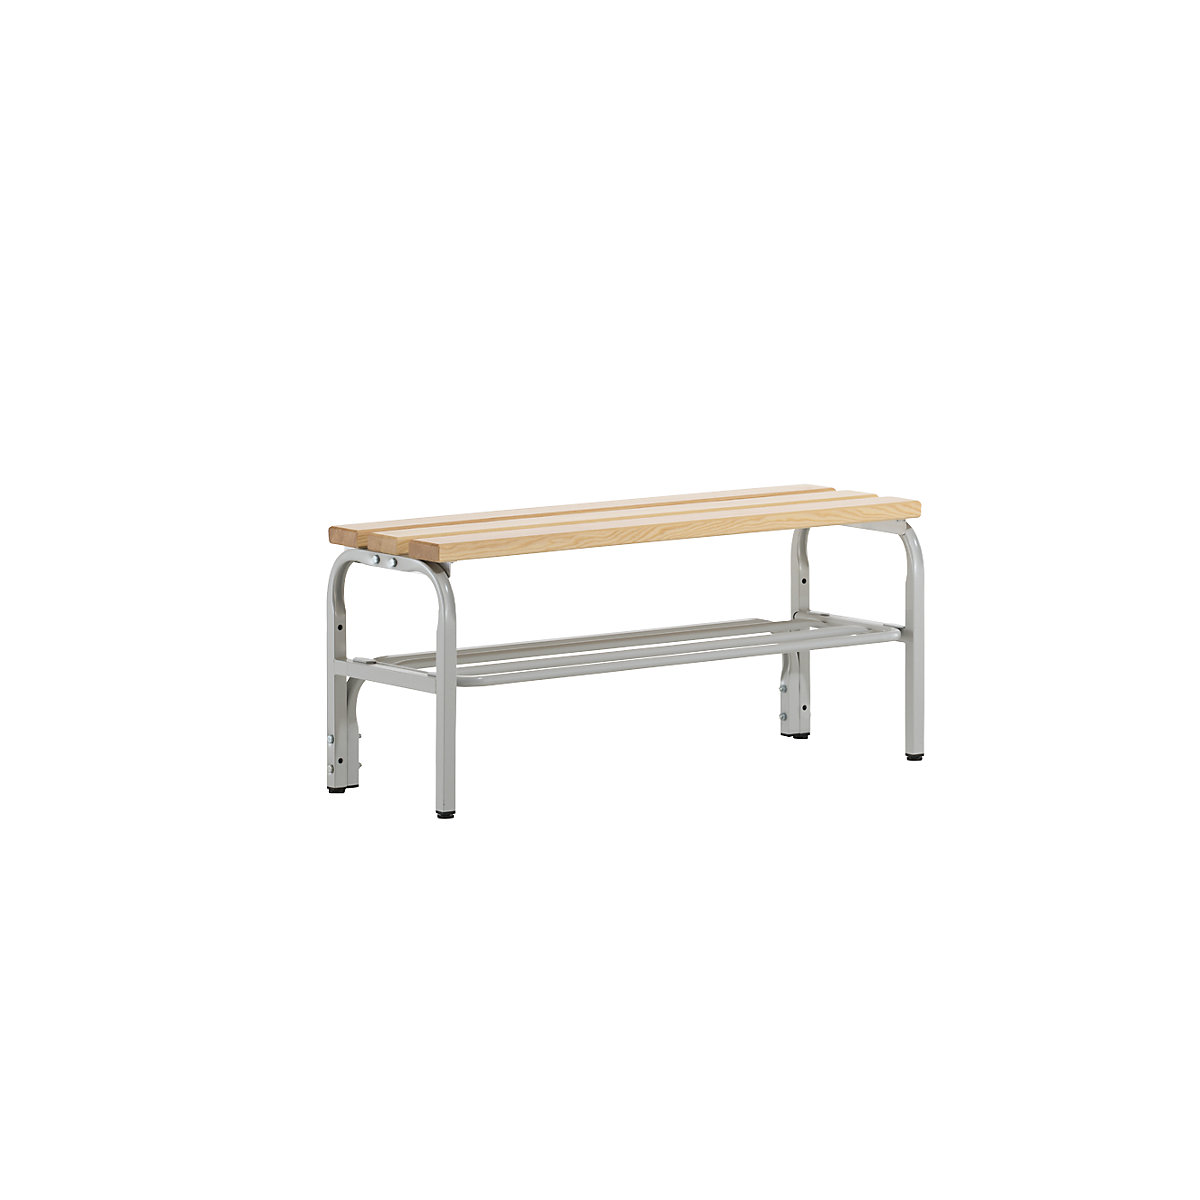 Sypro – Cloakroom bench